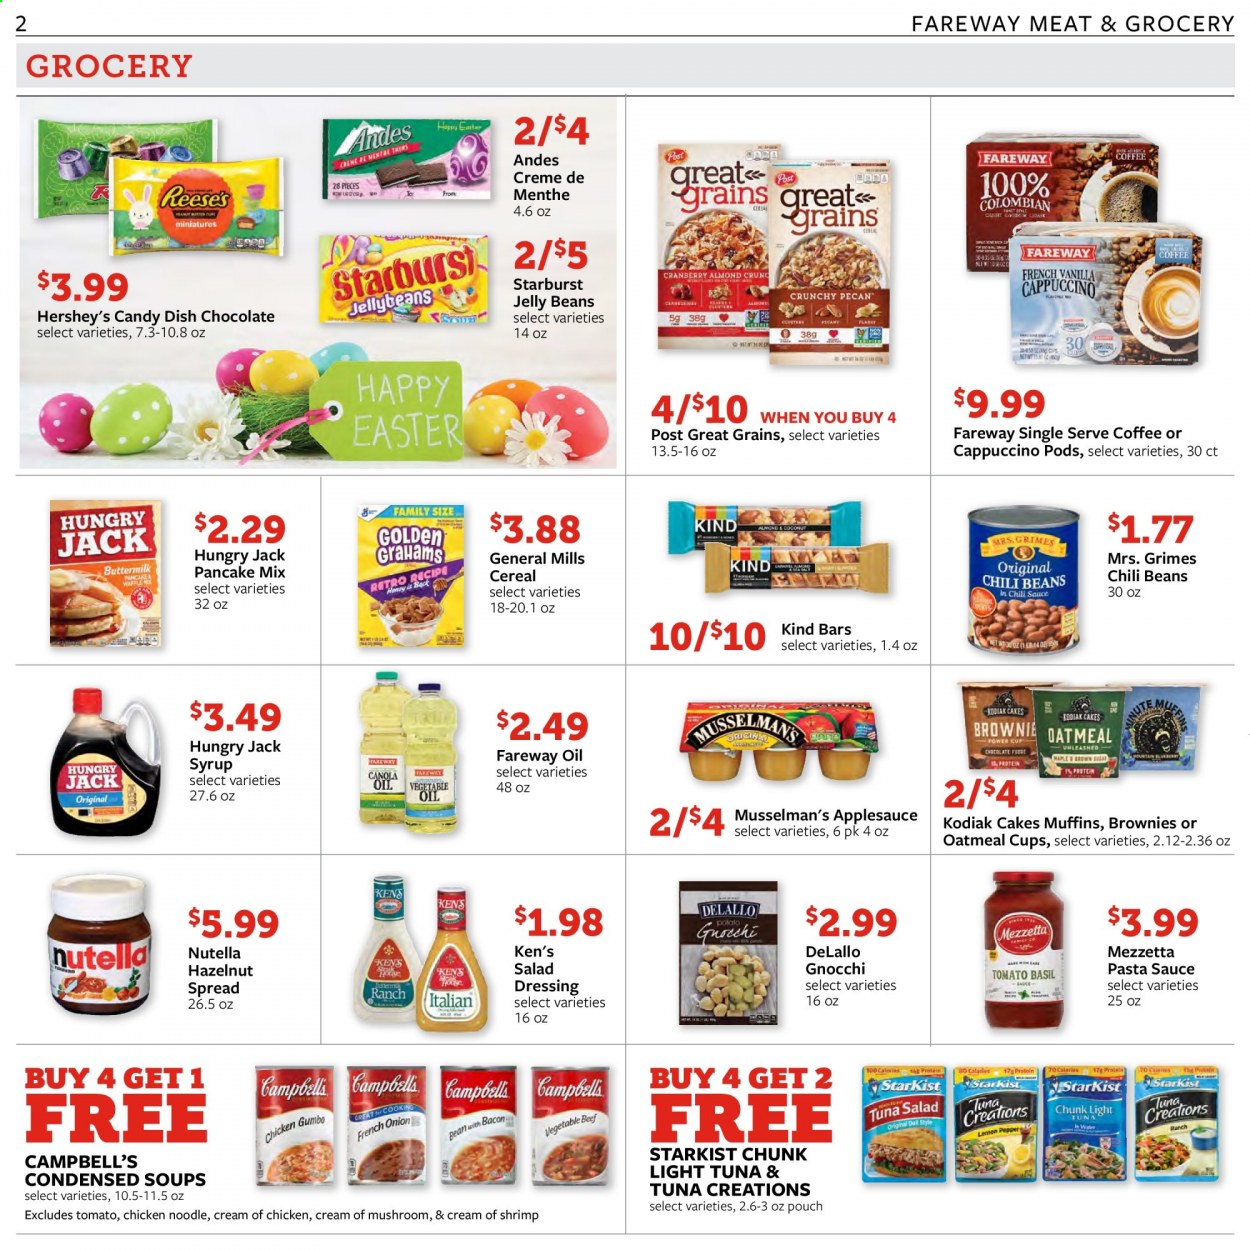 thumbnail - Fareway Flyer - 03/02/2021 - 03/08/2021 - Sales products - mushrooms, cake, brownies, pancakes, muffin, tuna, shrimps, StarKist, Campbell's, gnocchi, sauce, Hershey's, Nutella, chocolate, jelly beans, Starburst, oatmeal, chili beans, light tuna, cereals, noodles, salad dressing, pasta sauce, dressing, oil, apple sauce, syrup, hazelnut spread, cappuccino, coffee, creme de menthe. Page 2.